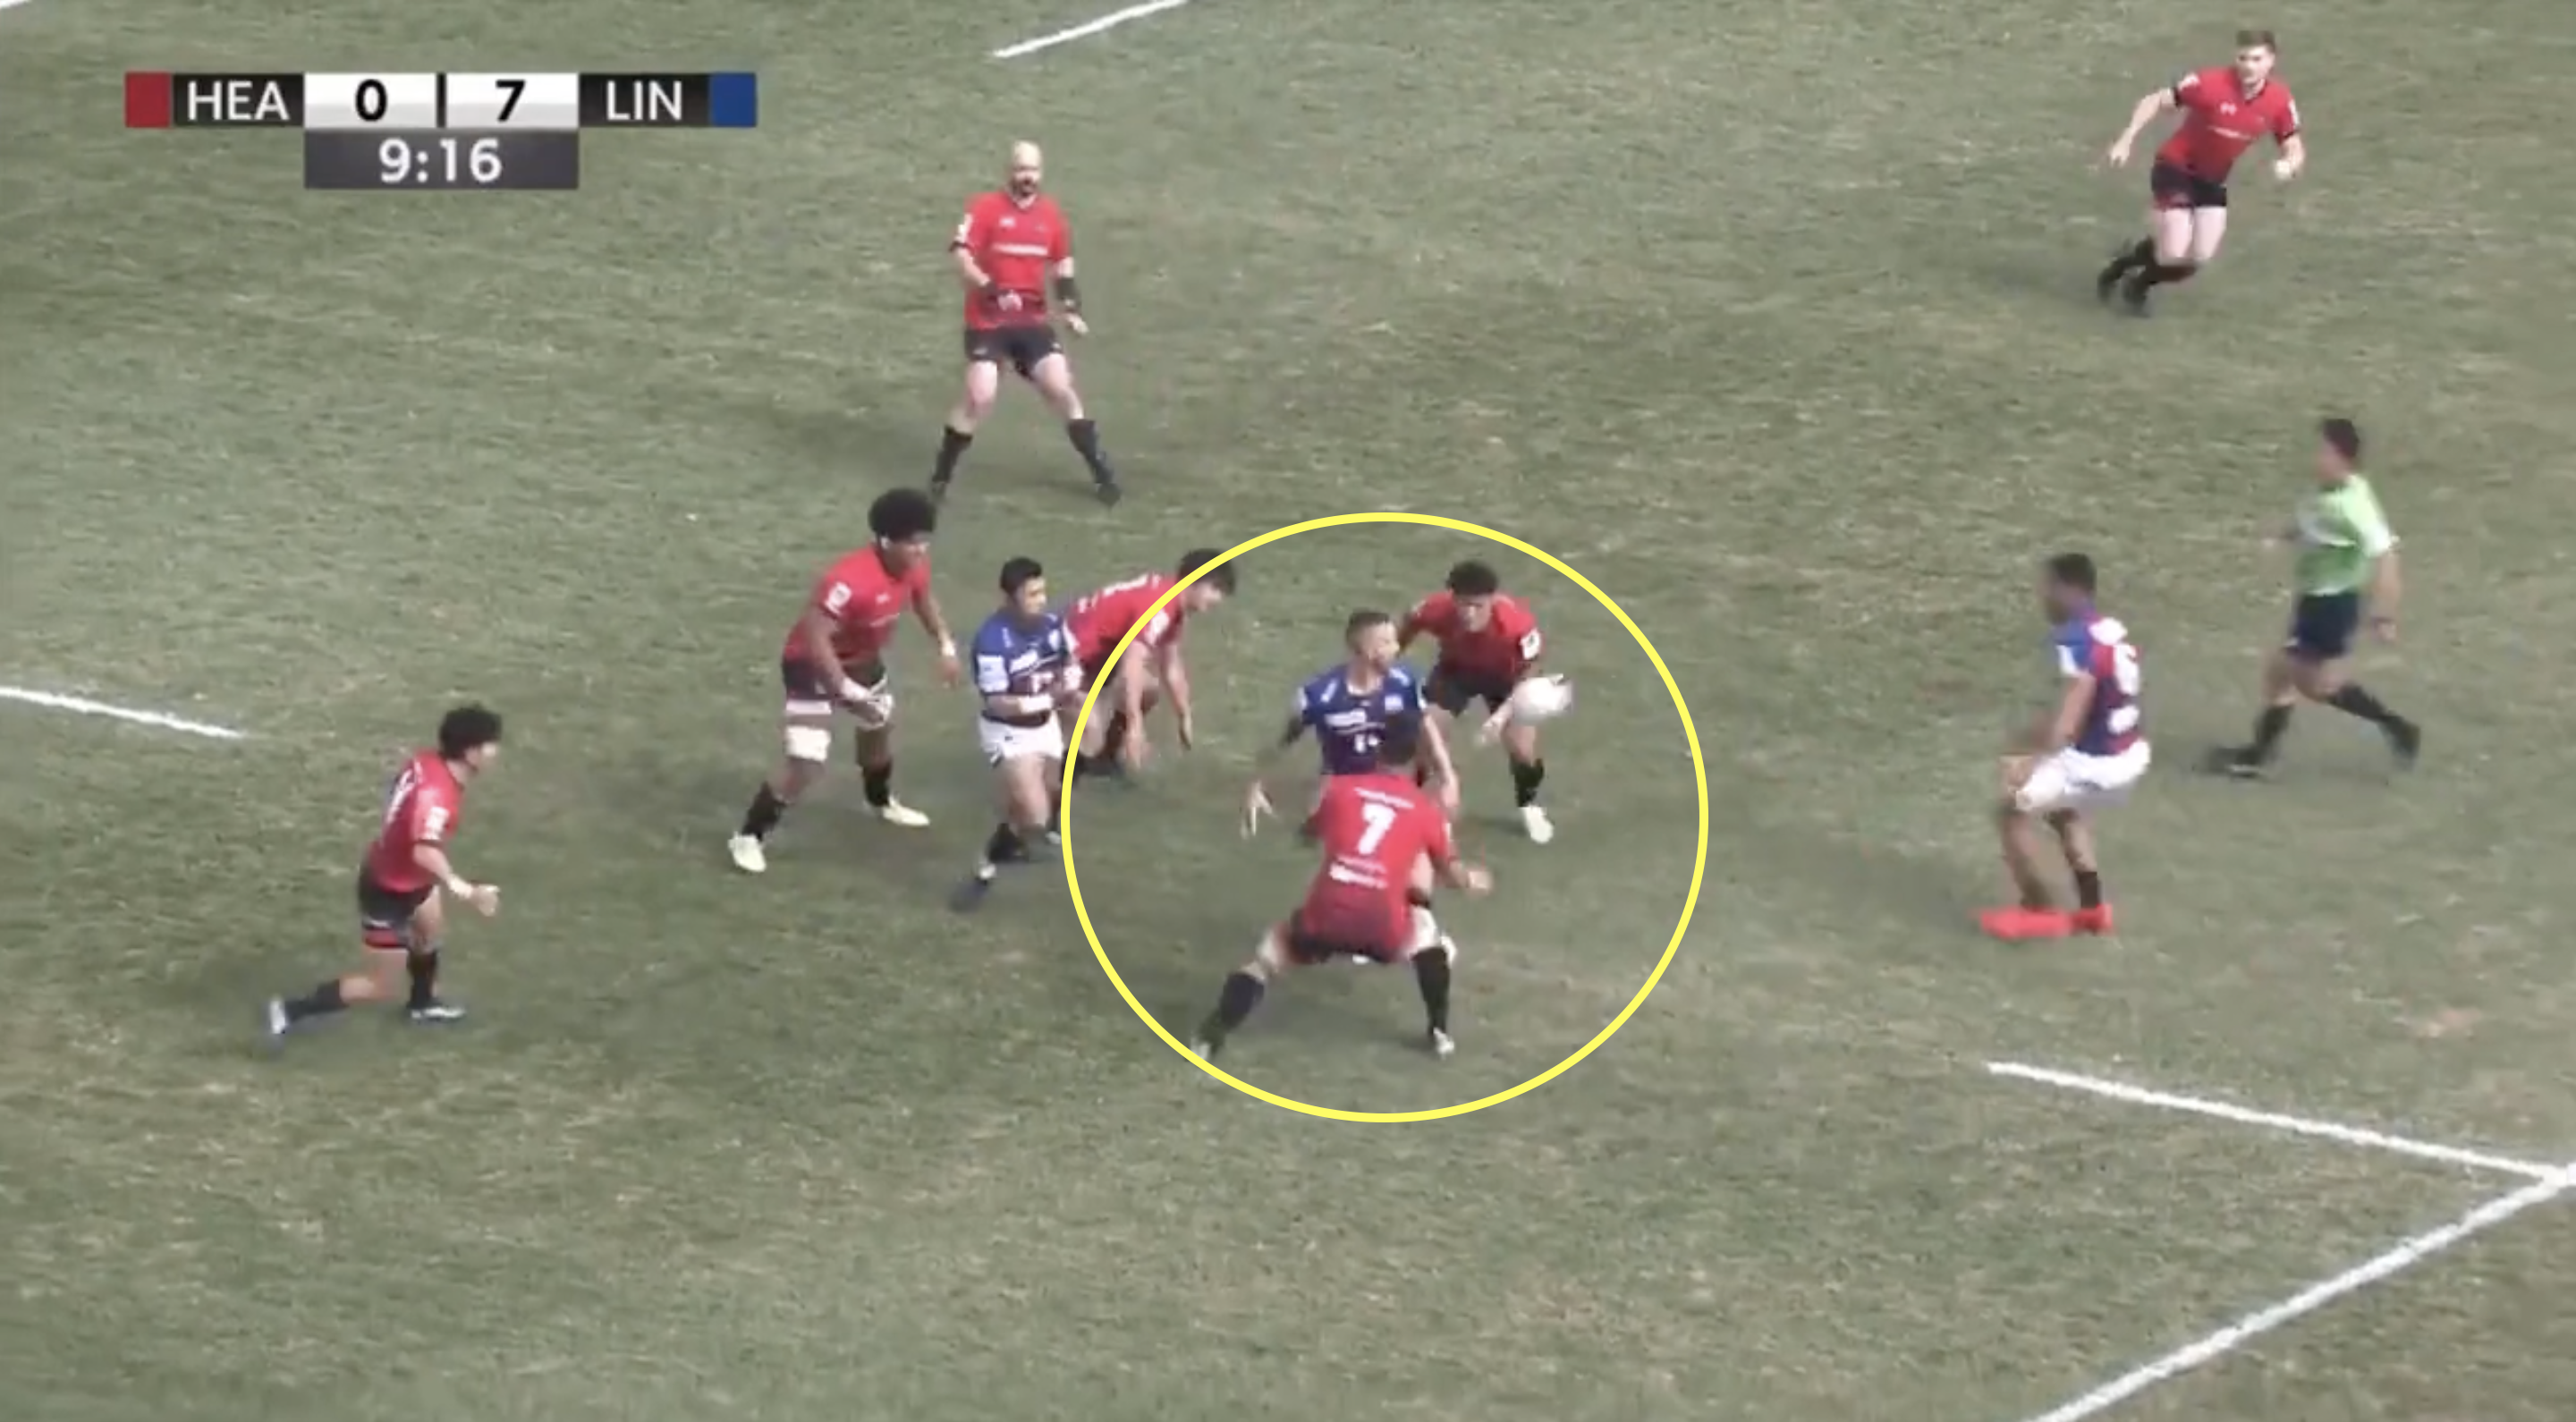 Quade Cooper is literally a one-man show with breathtaking skill in try